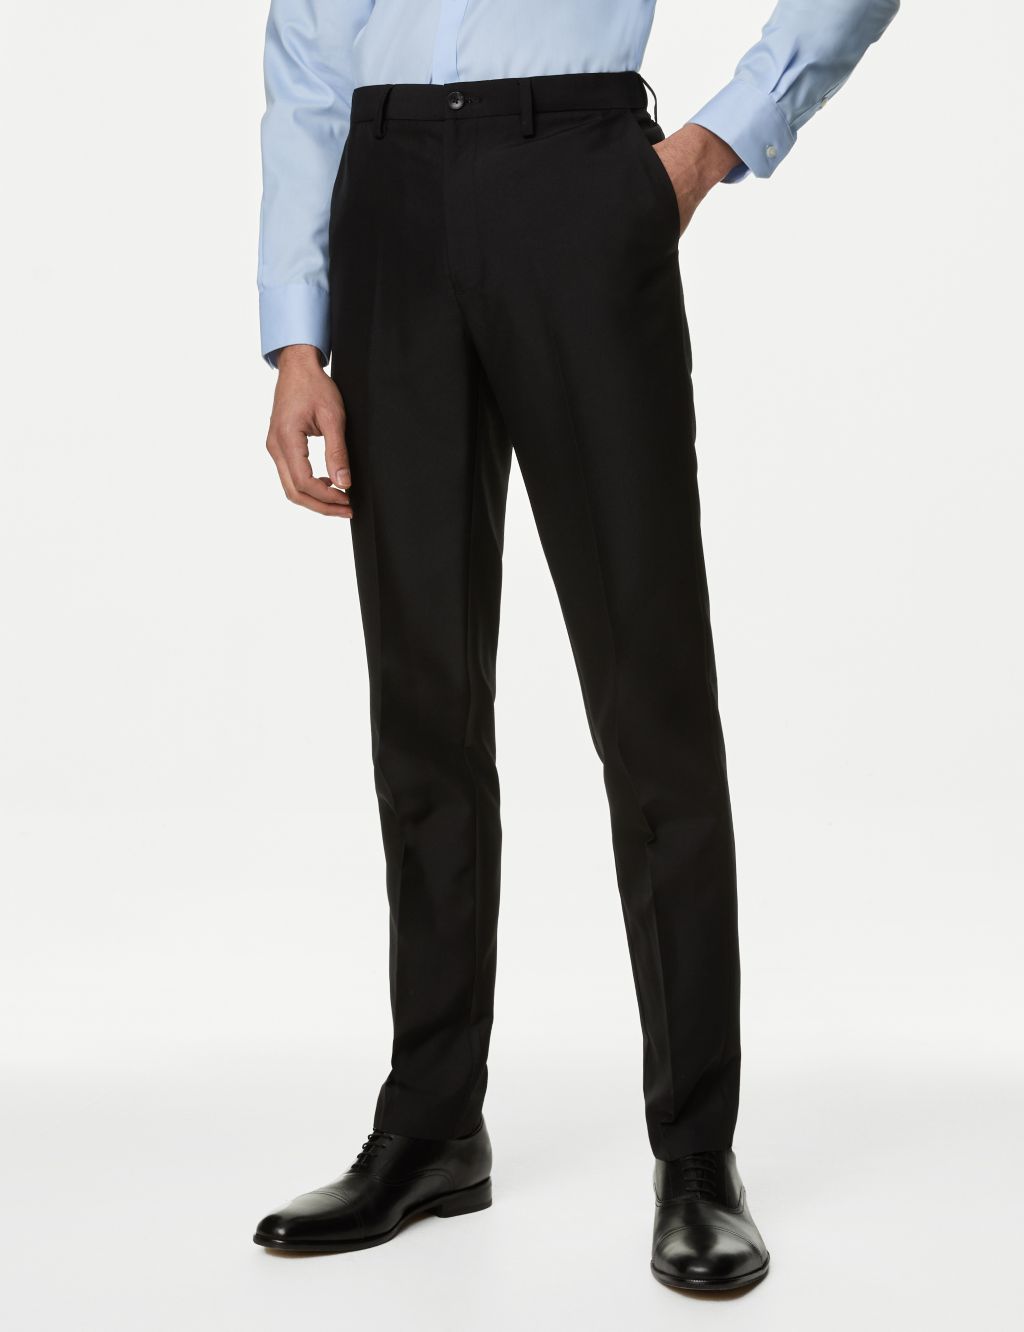 Slim Fit Trouser with Active Waist image 1